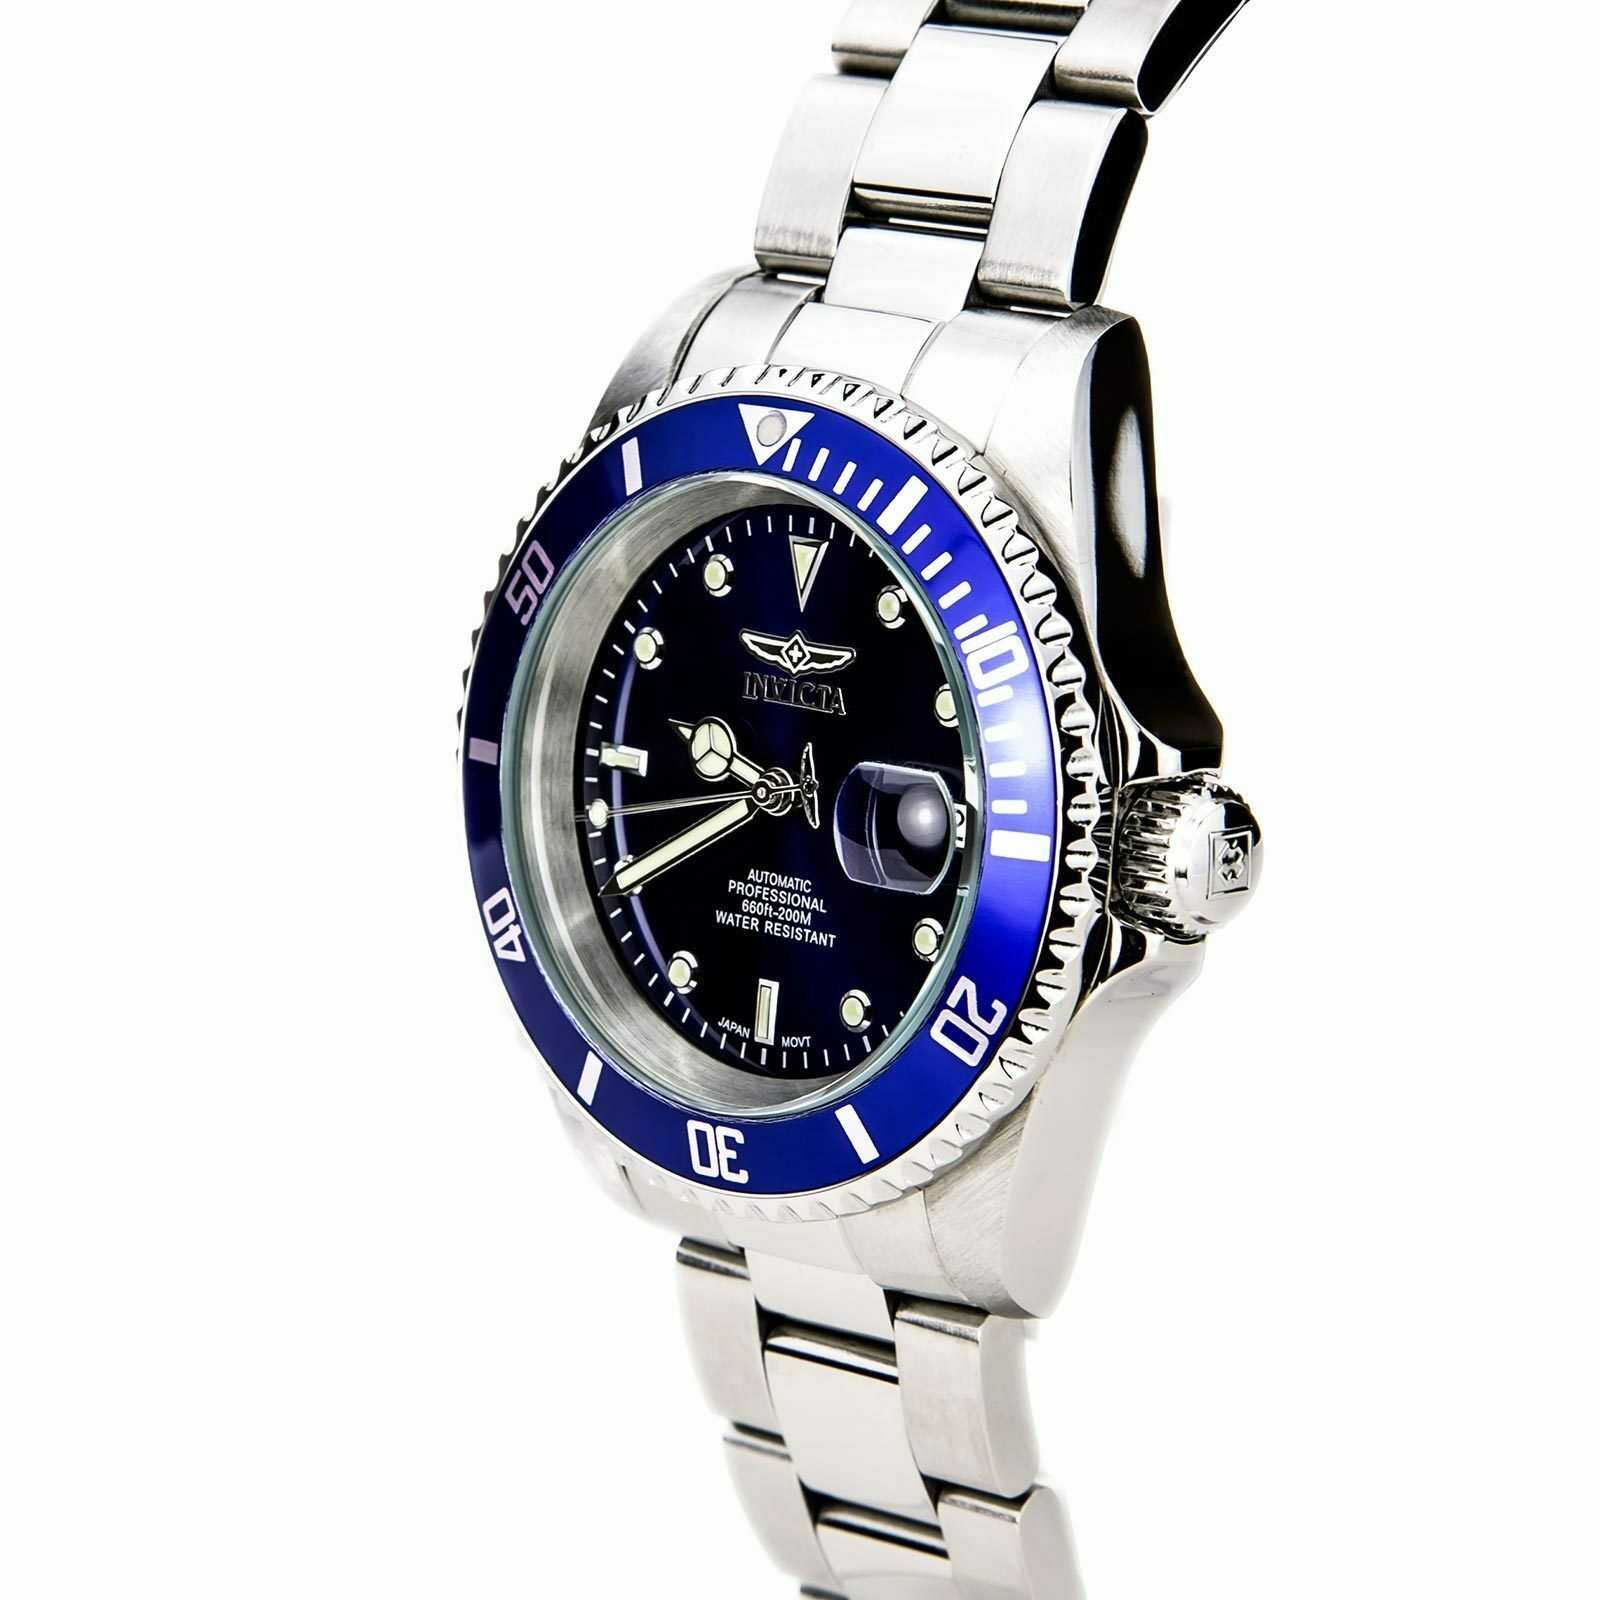 Diver Stainless Steel Blue Dial Automatic Mens Watch....40 – Vincent Palazzolo